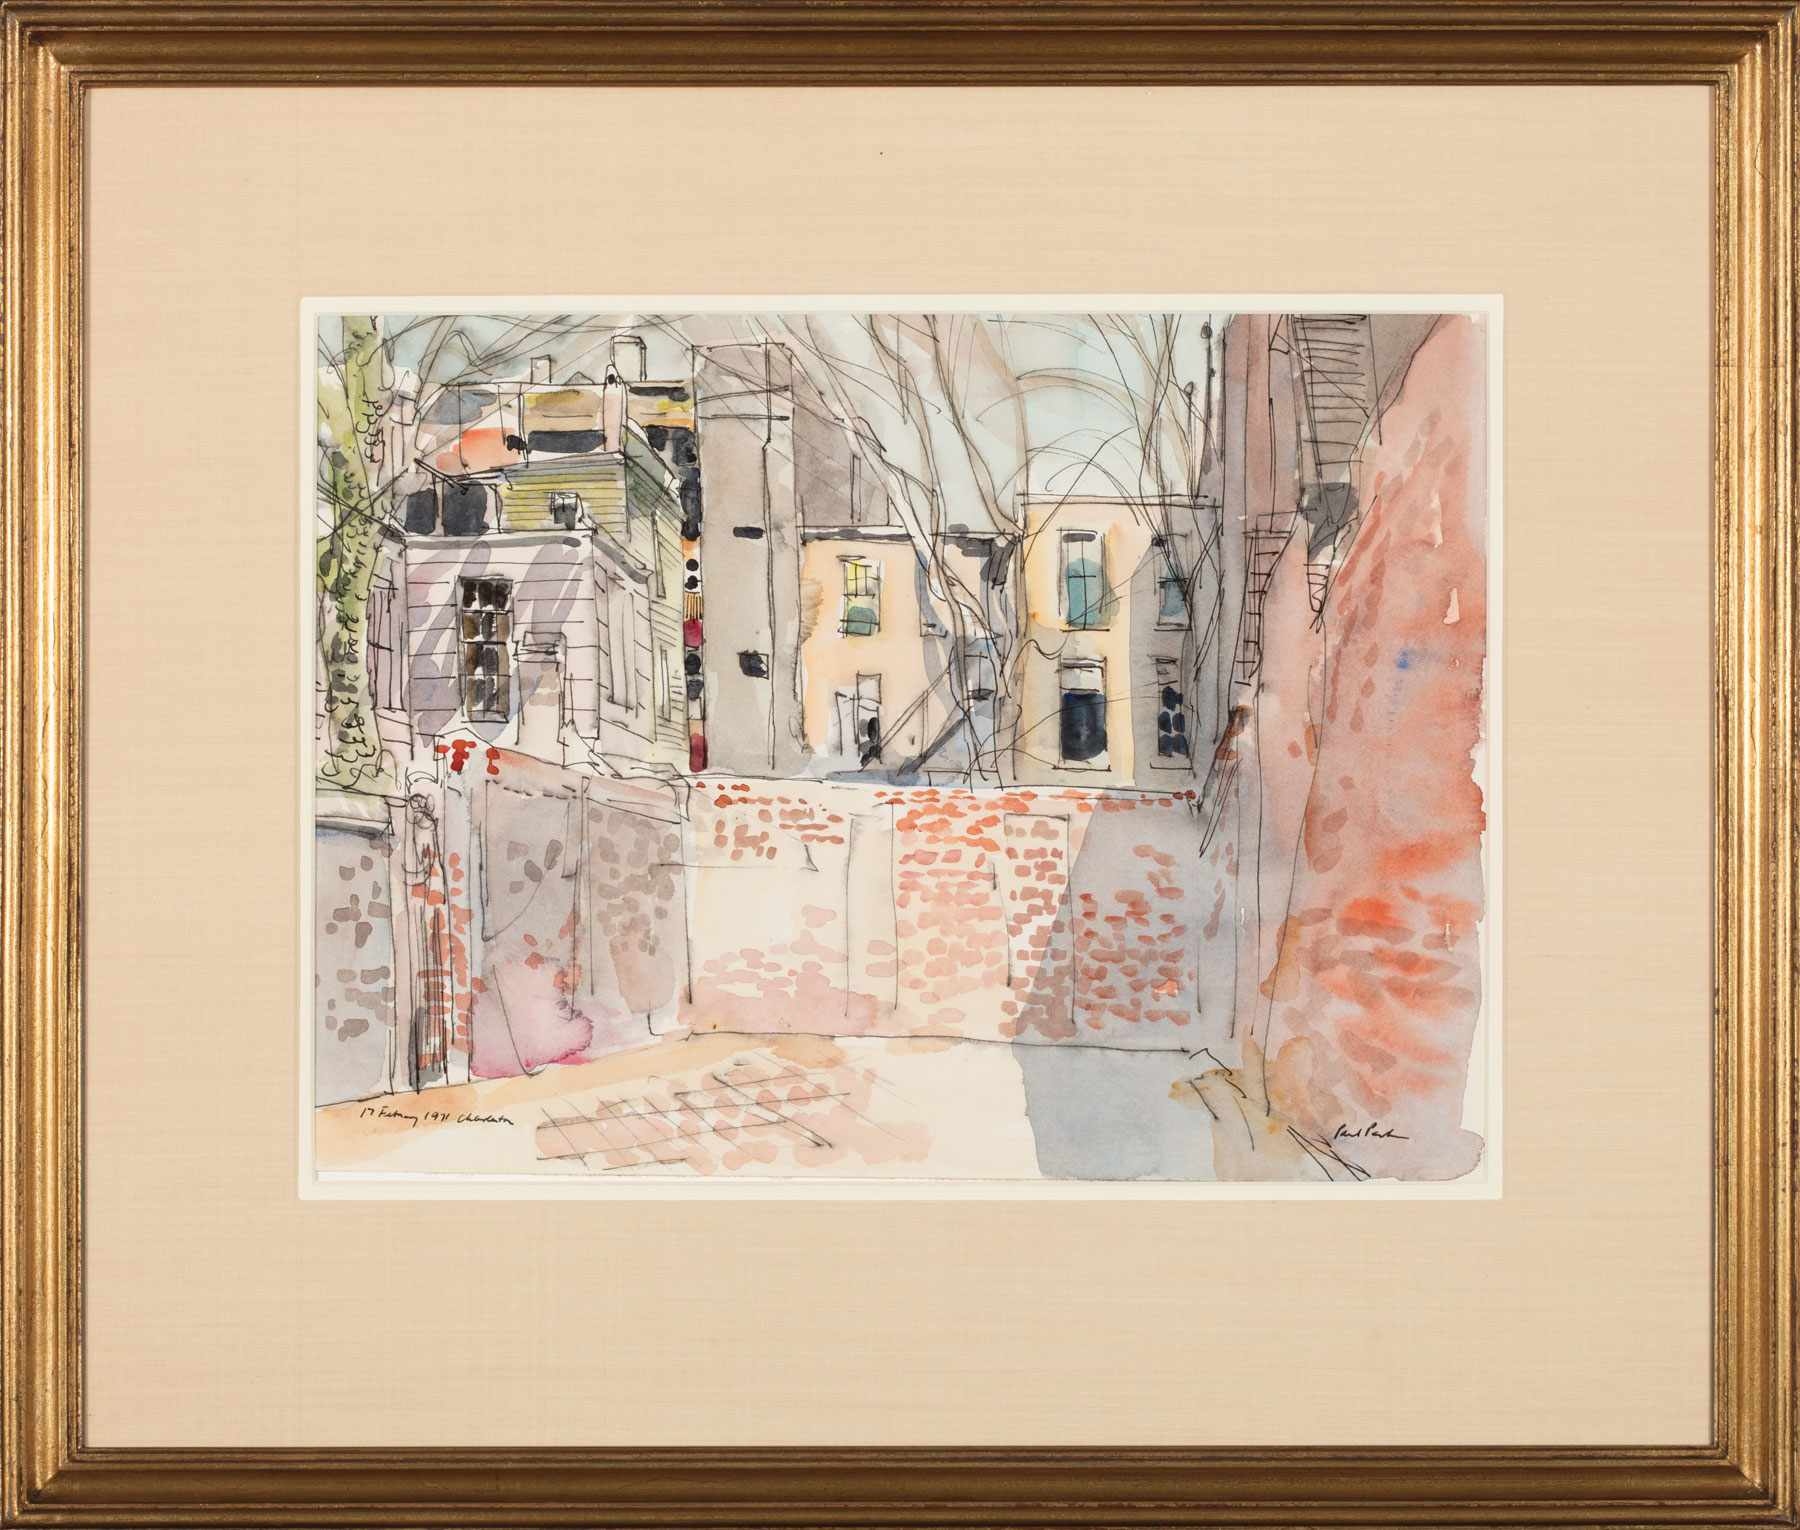 Paul Parker (American/Illinois, 1905-1987), "Back Alley, Charleston", "St. Michael's from Queen